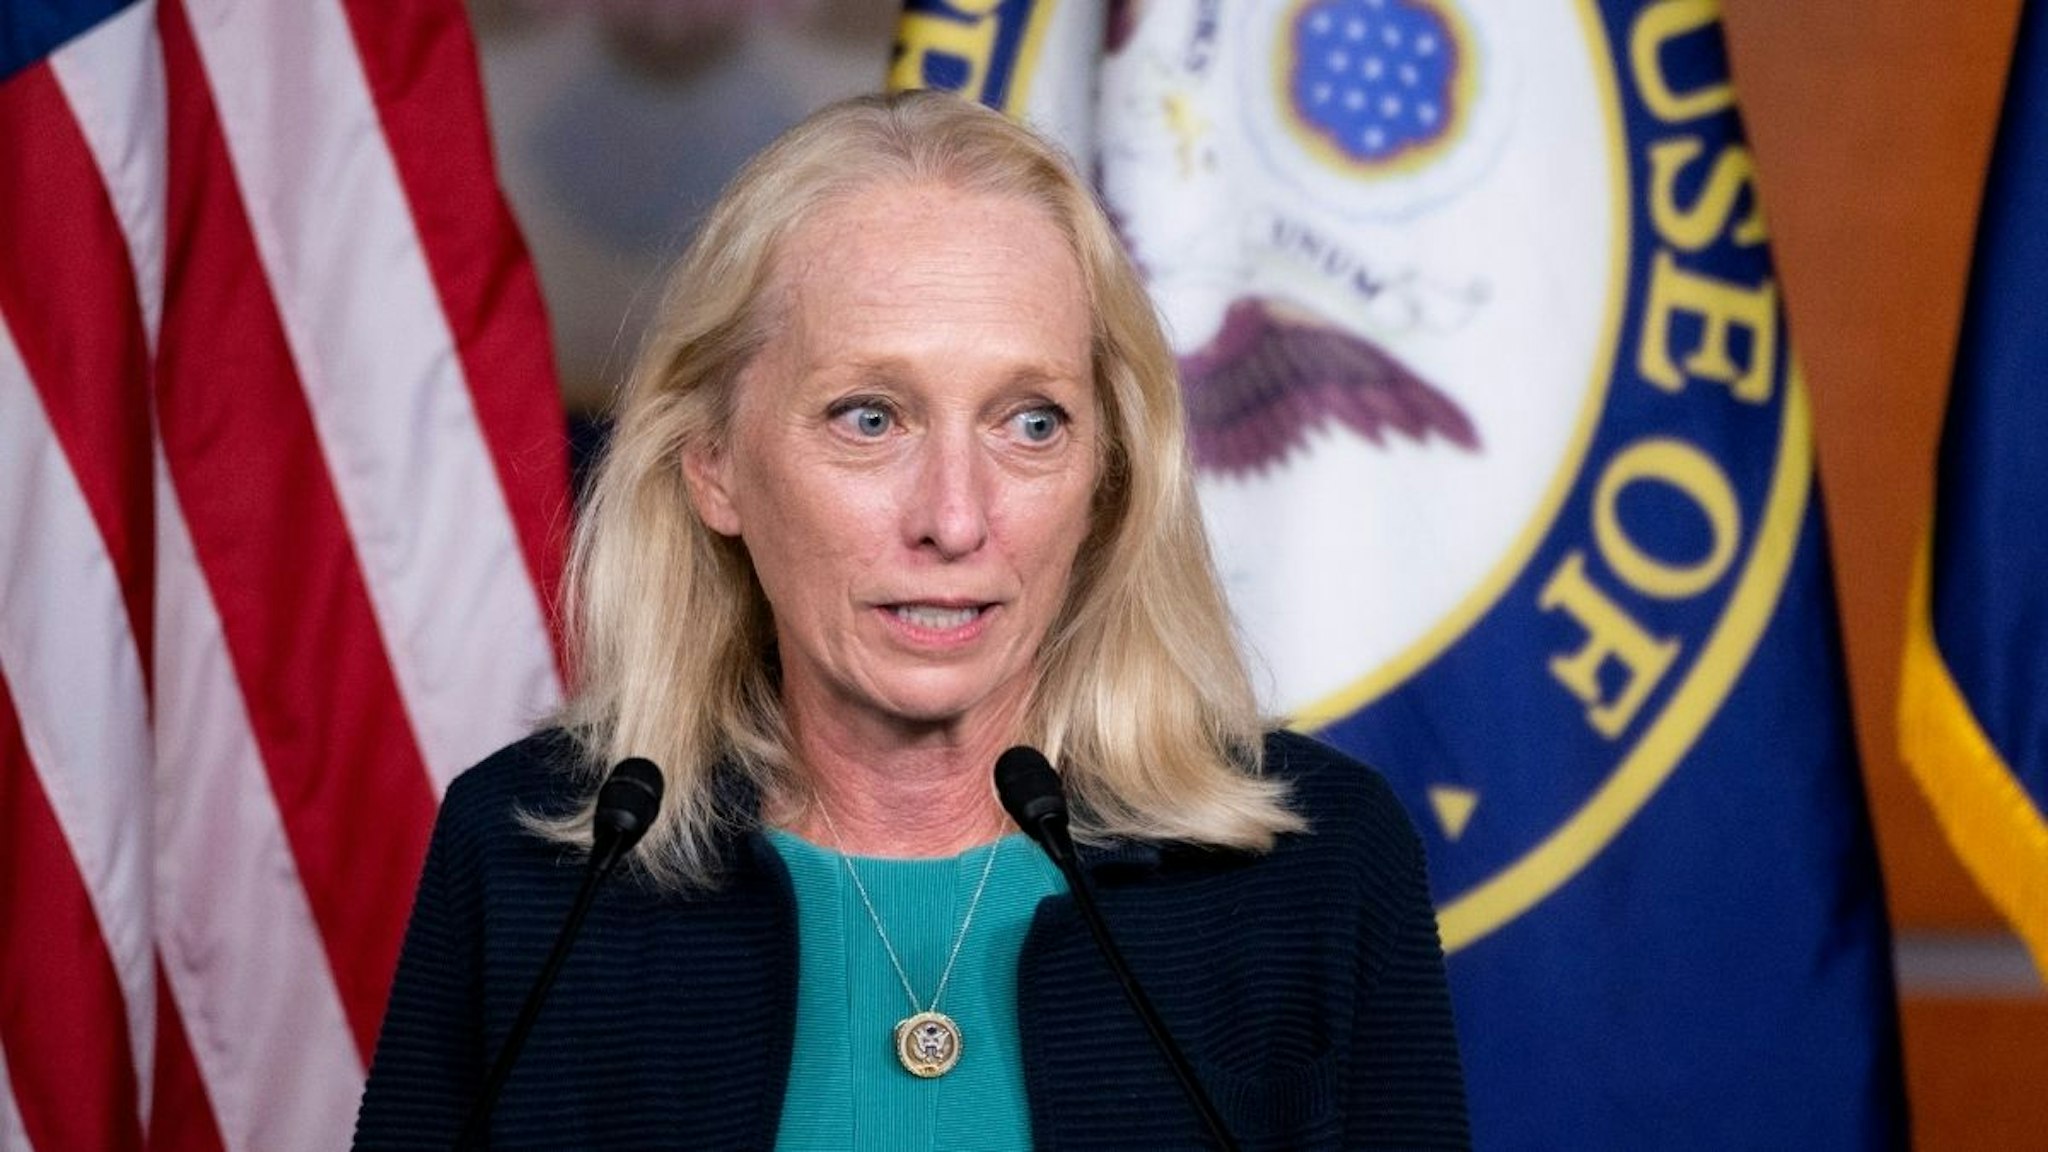 Rep. Mary Gay Scanlon, D-Pa., speaks during the news conference introducing the Protecting Our Democracy Act in the Capitol on Tuesday, Sept. 21, 2021.